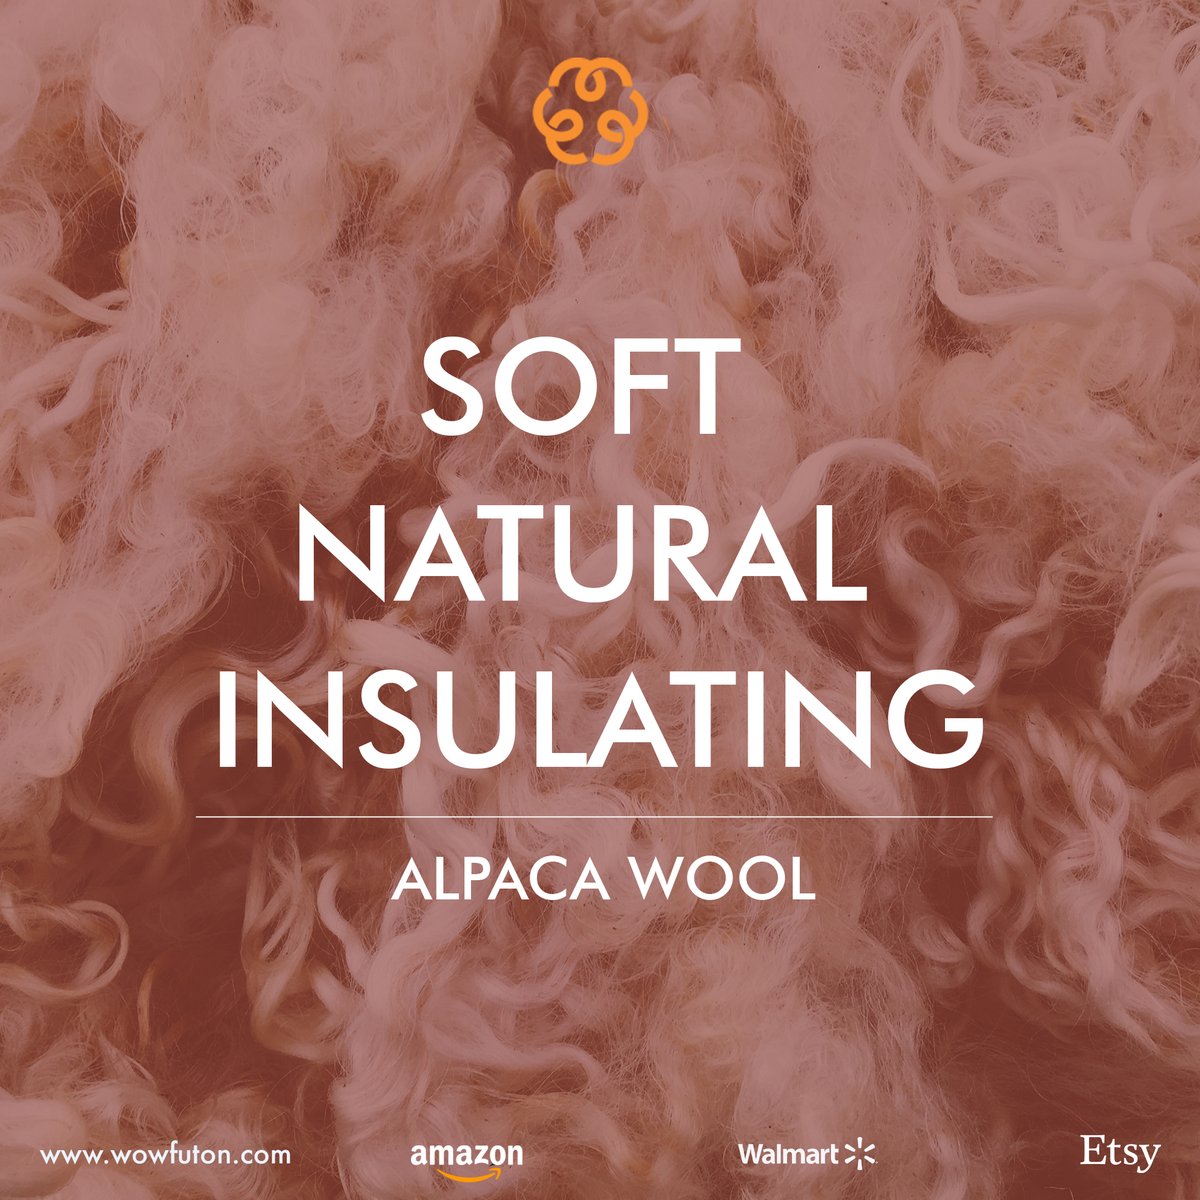 💤 WoW Futon alpaca wool bedding is the ideal addition to any mattress. Ready to keep you at a comfortable temperature all night long.

🧡 Explore more at WoWFuton.com

#wowfuton 
#alpacawool
#organicsleep
#organicbedding
#Amazon
#wallmart
#etsy